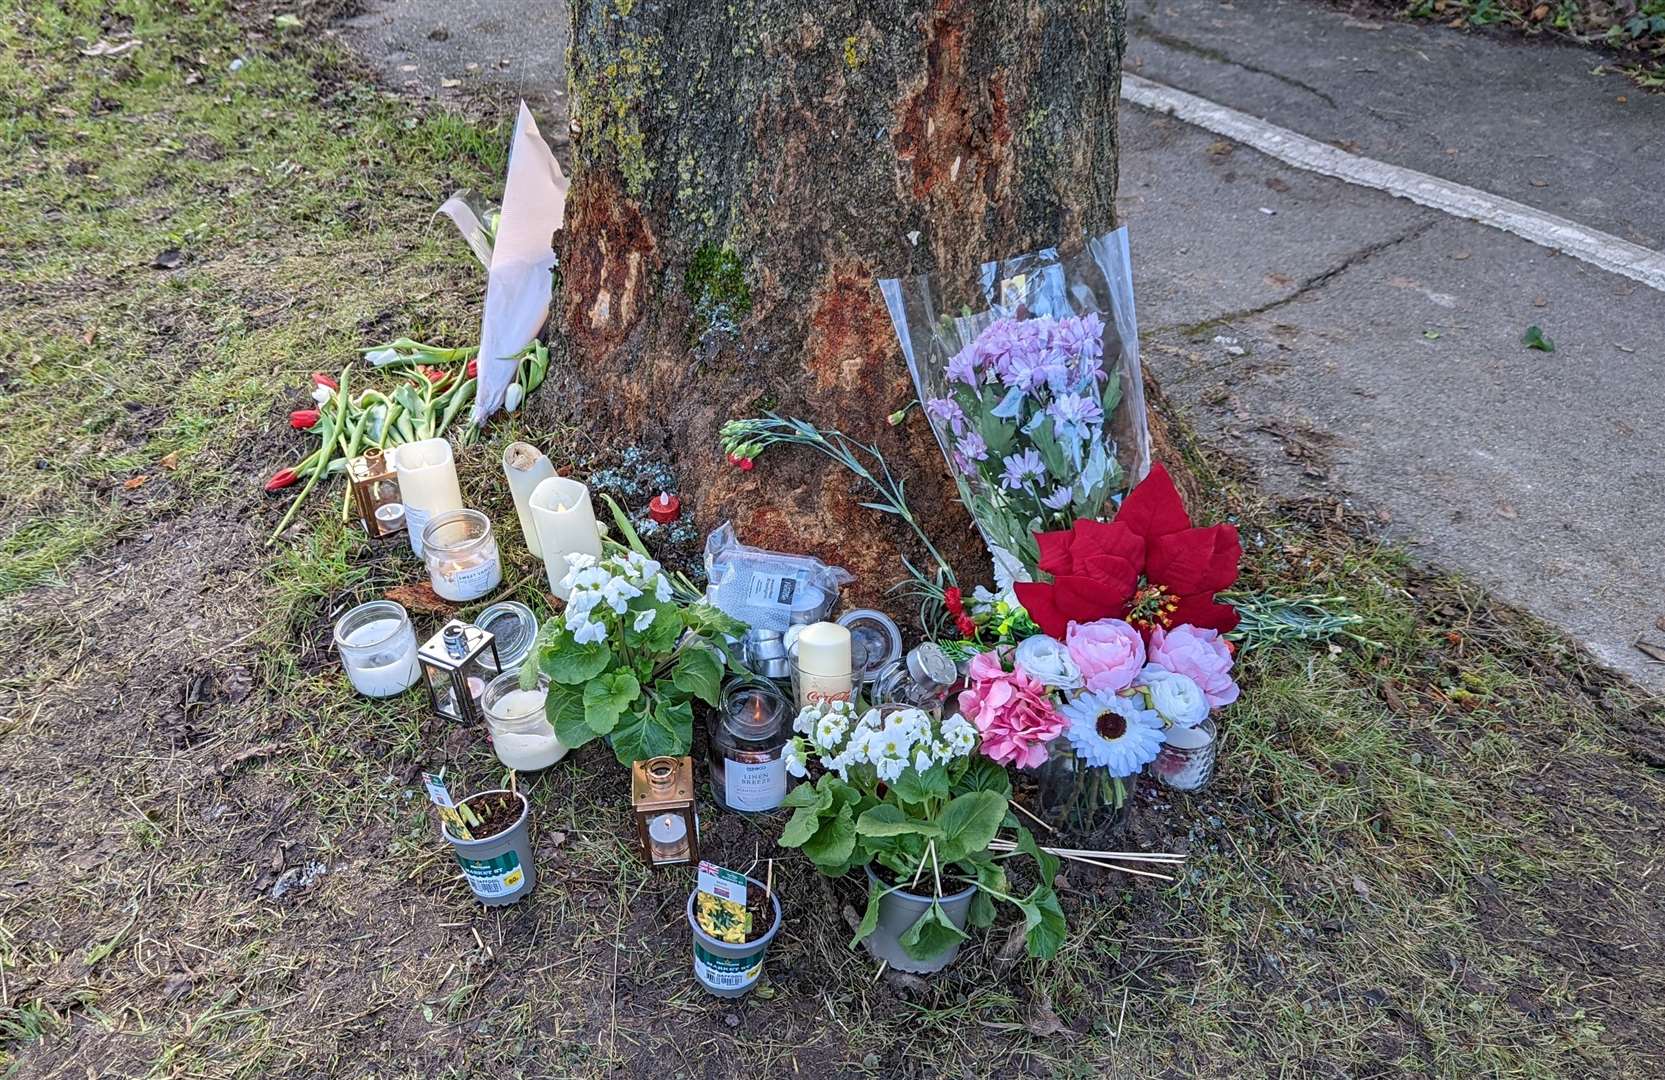 Floral tributes and candles left in memory of Razvan Costache